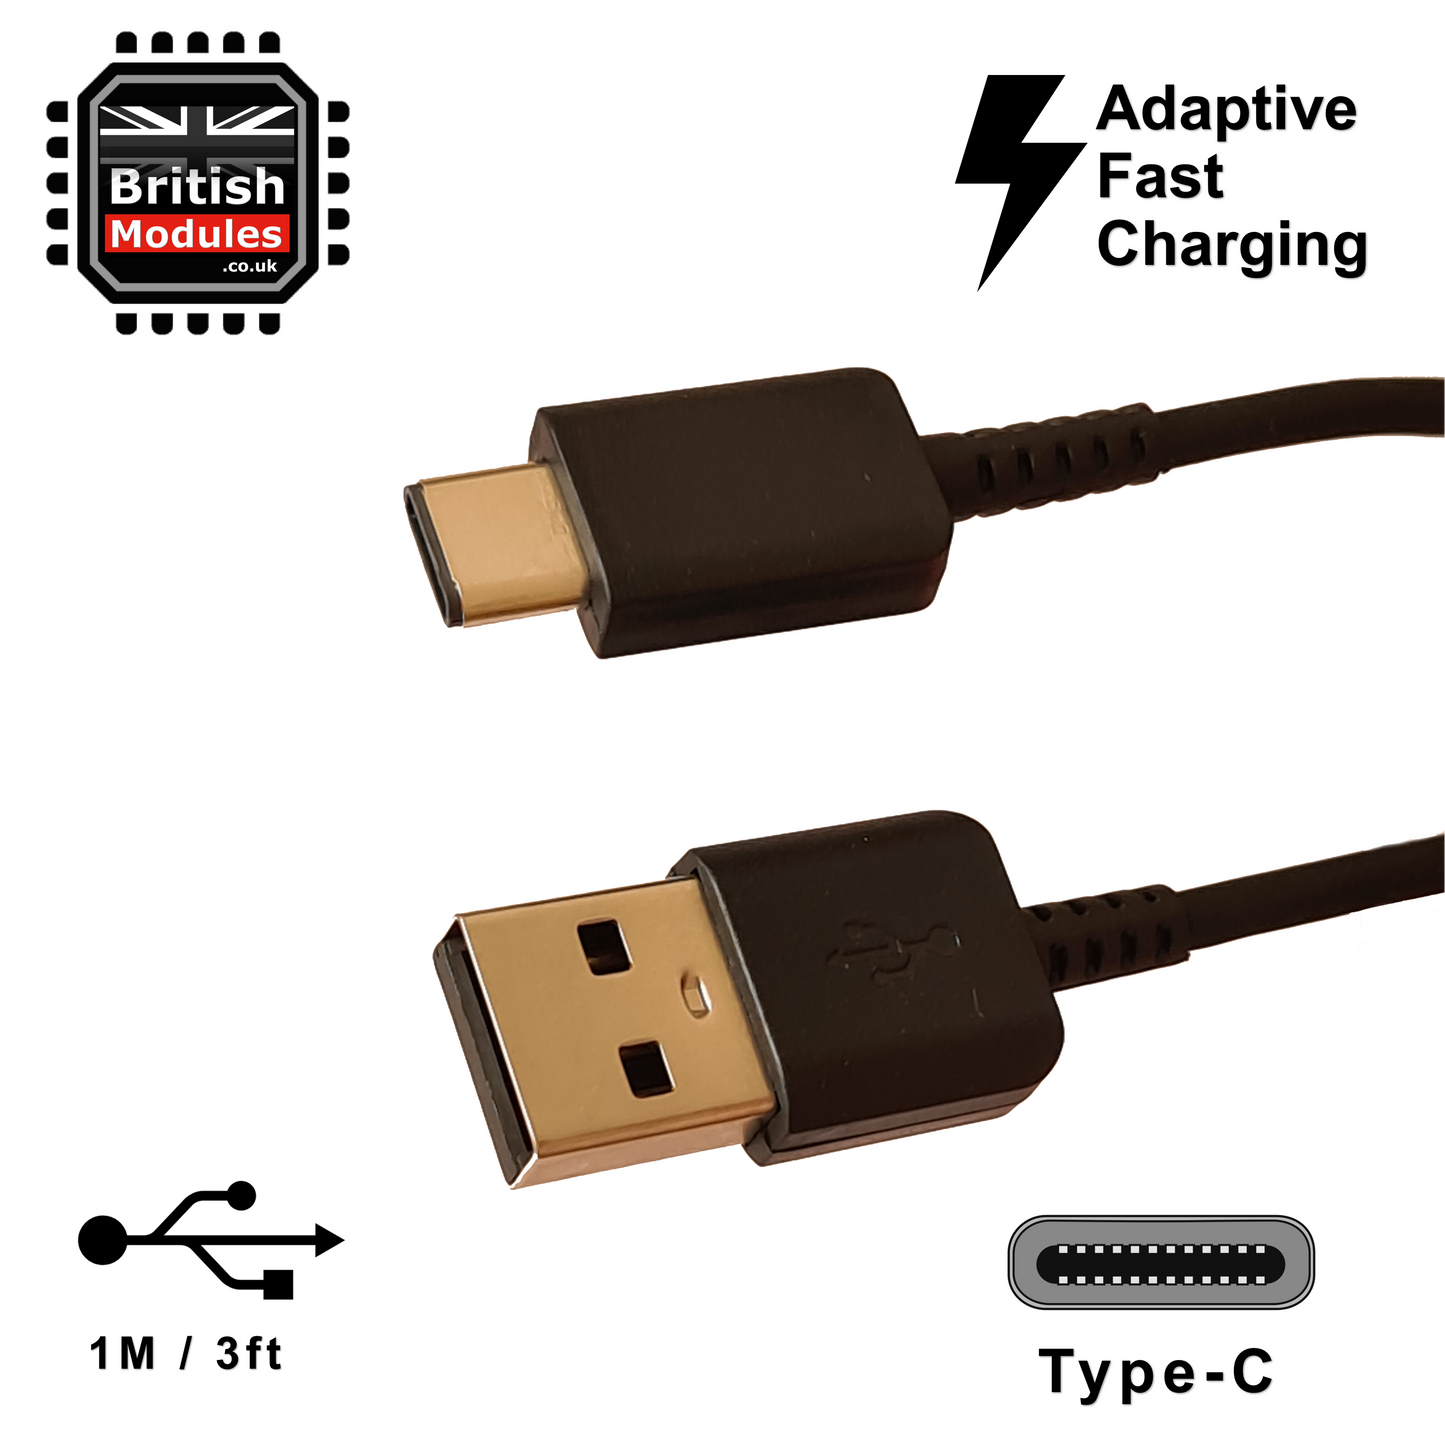 Samsung Charger USB-C Data Type C Cable for Samsung Galaxy S10 / S10e Lite / S10+ Plus (1M) Black EP-DG970BBE